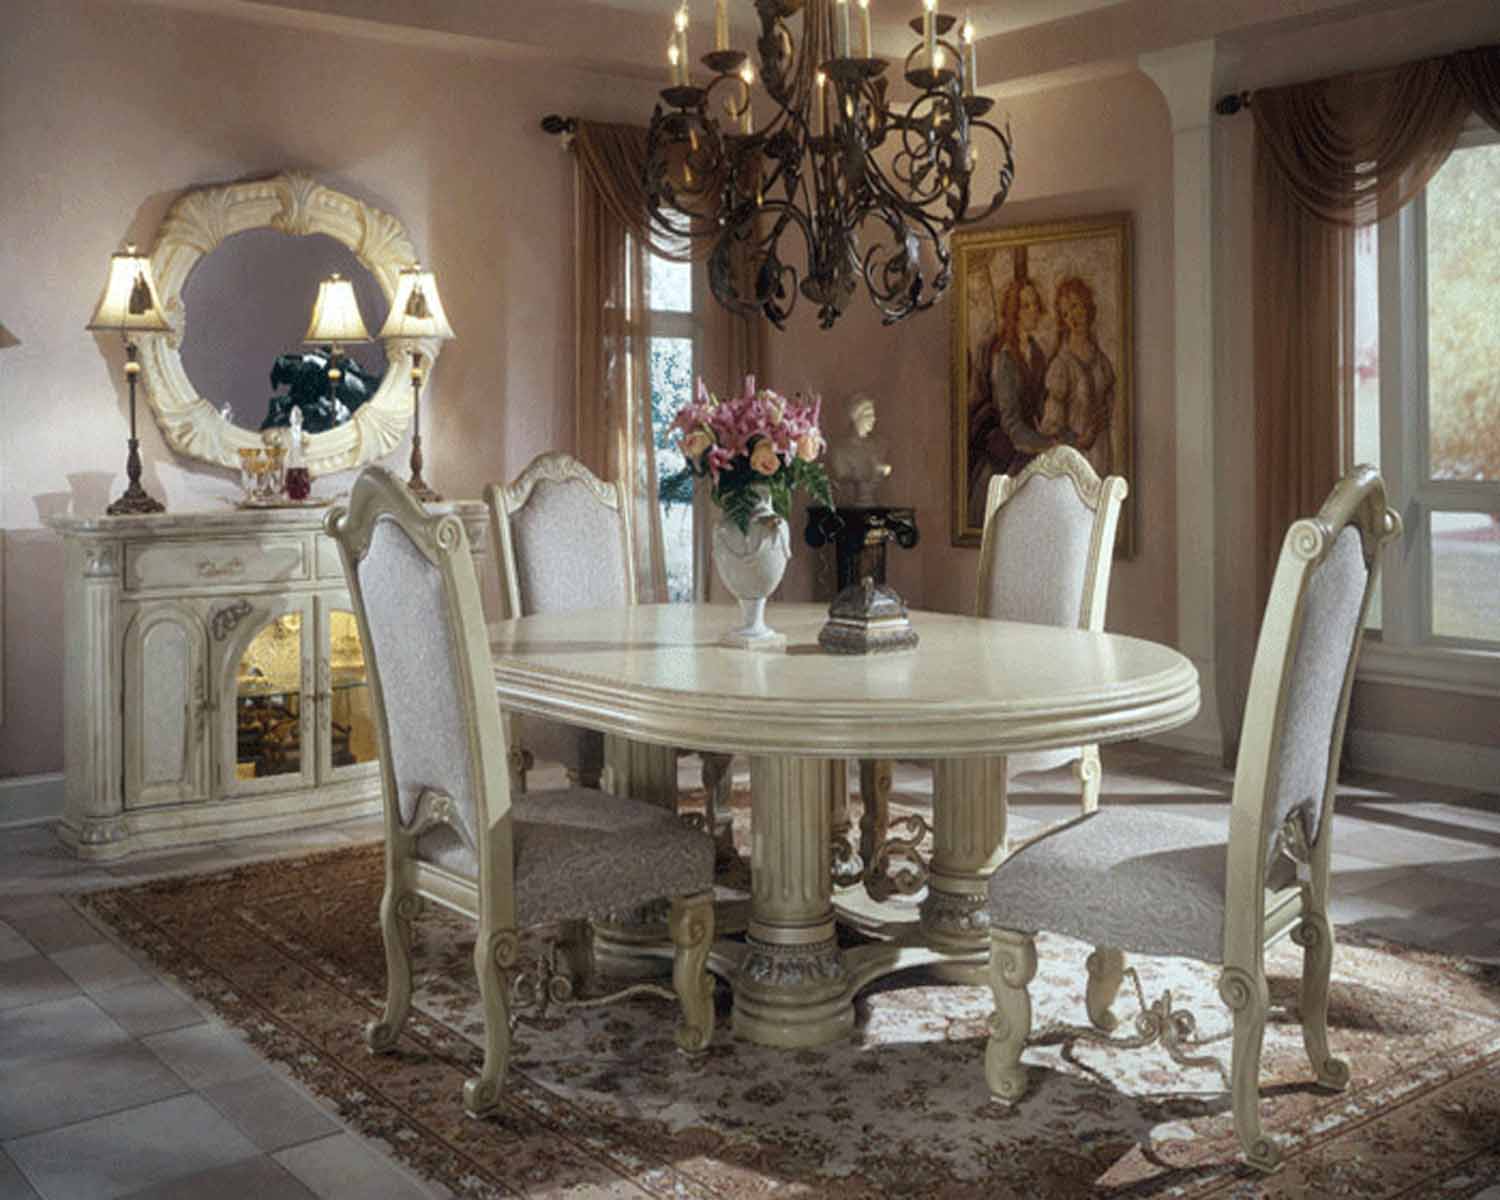 Awesome Traditional Dining Room Design Ideas | Ideas 4 Homes
